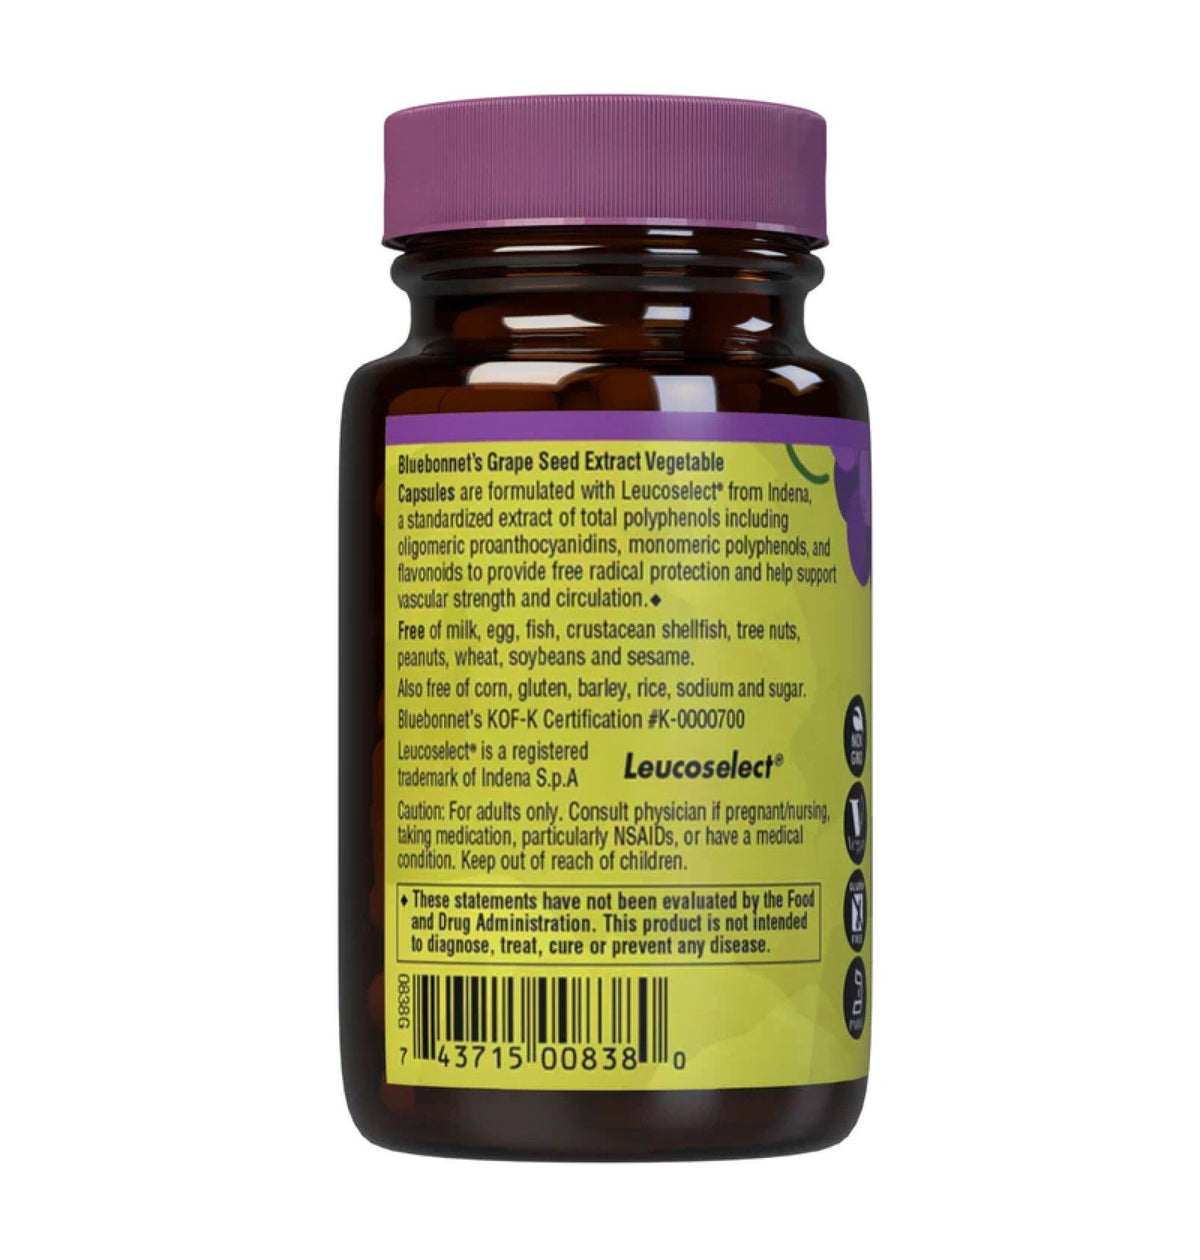 Bluebonnet Grape Seed Extract 100mg 30 Capsule